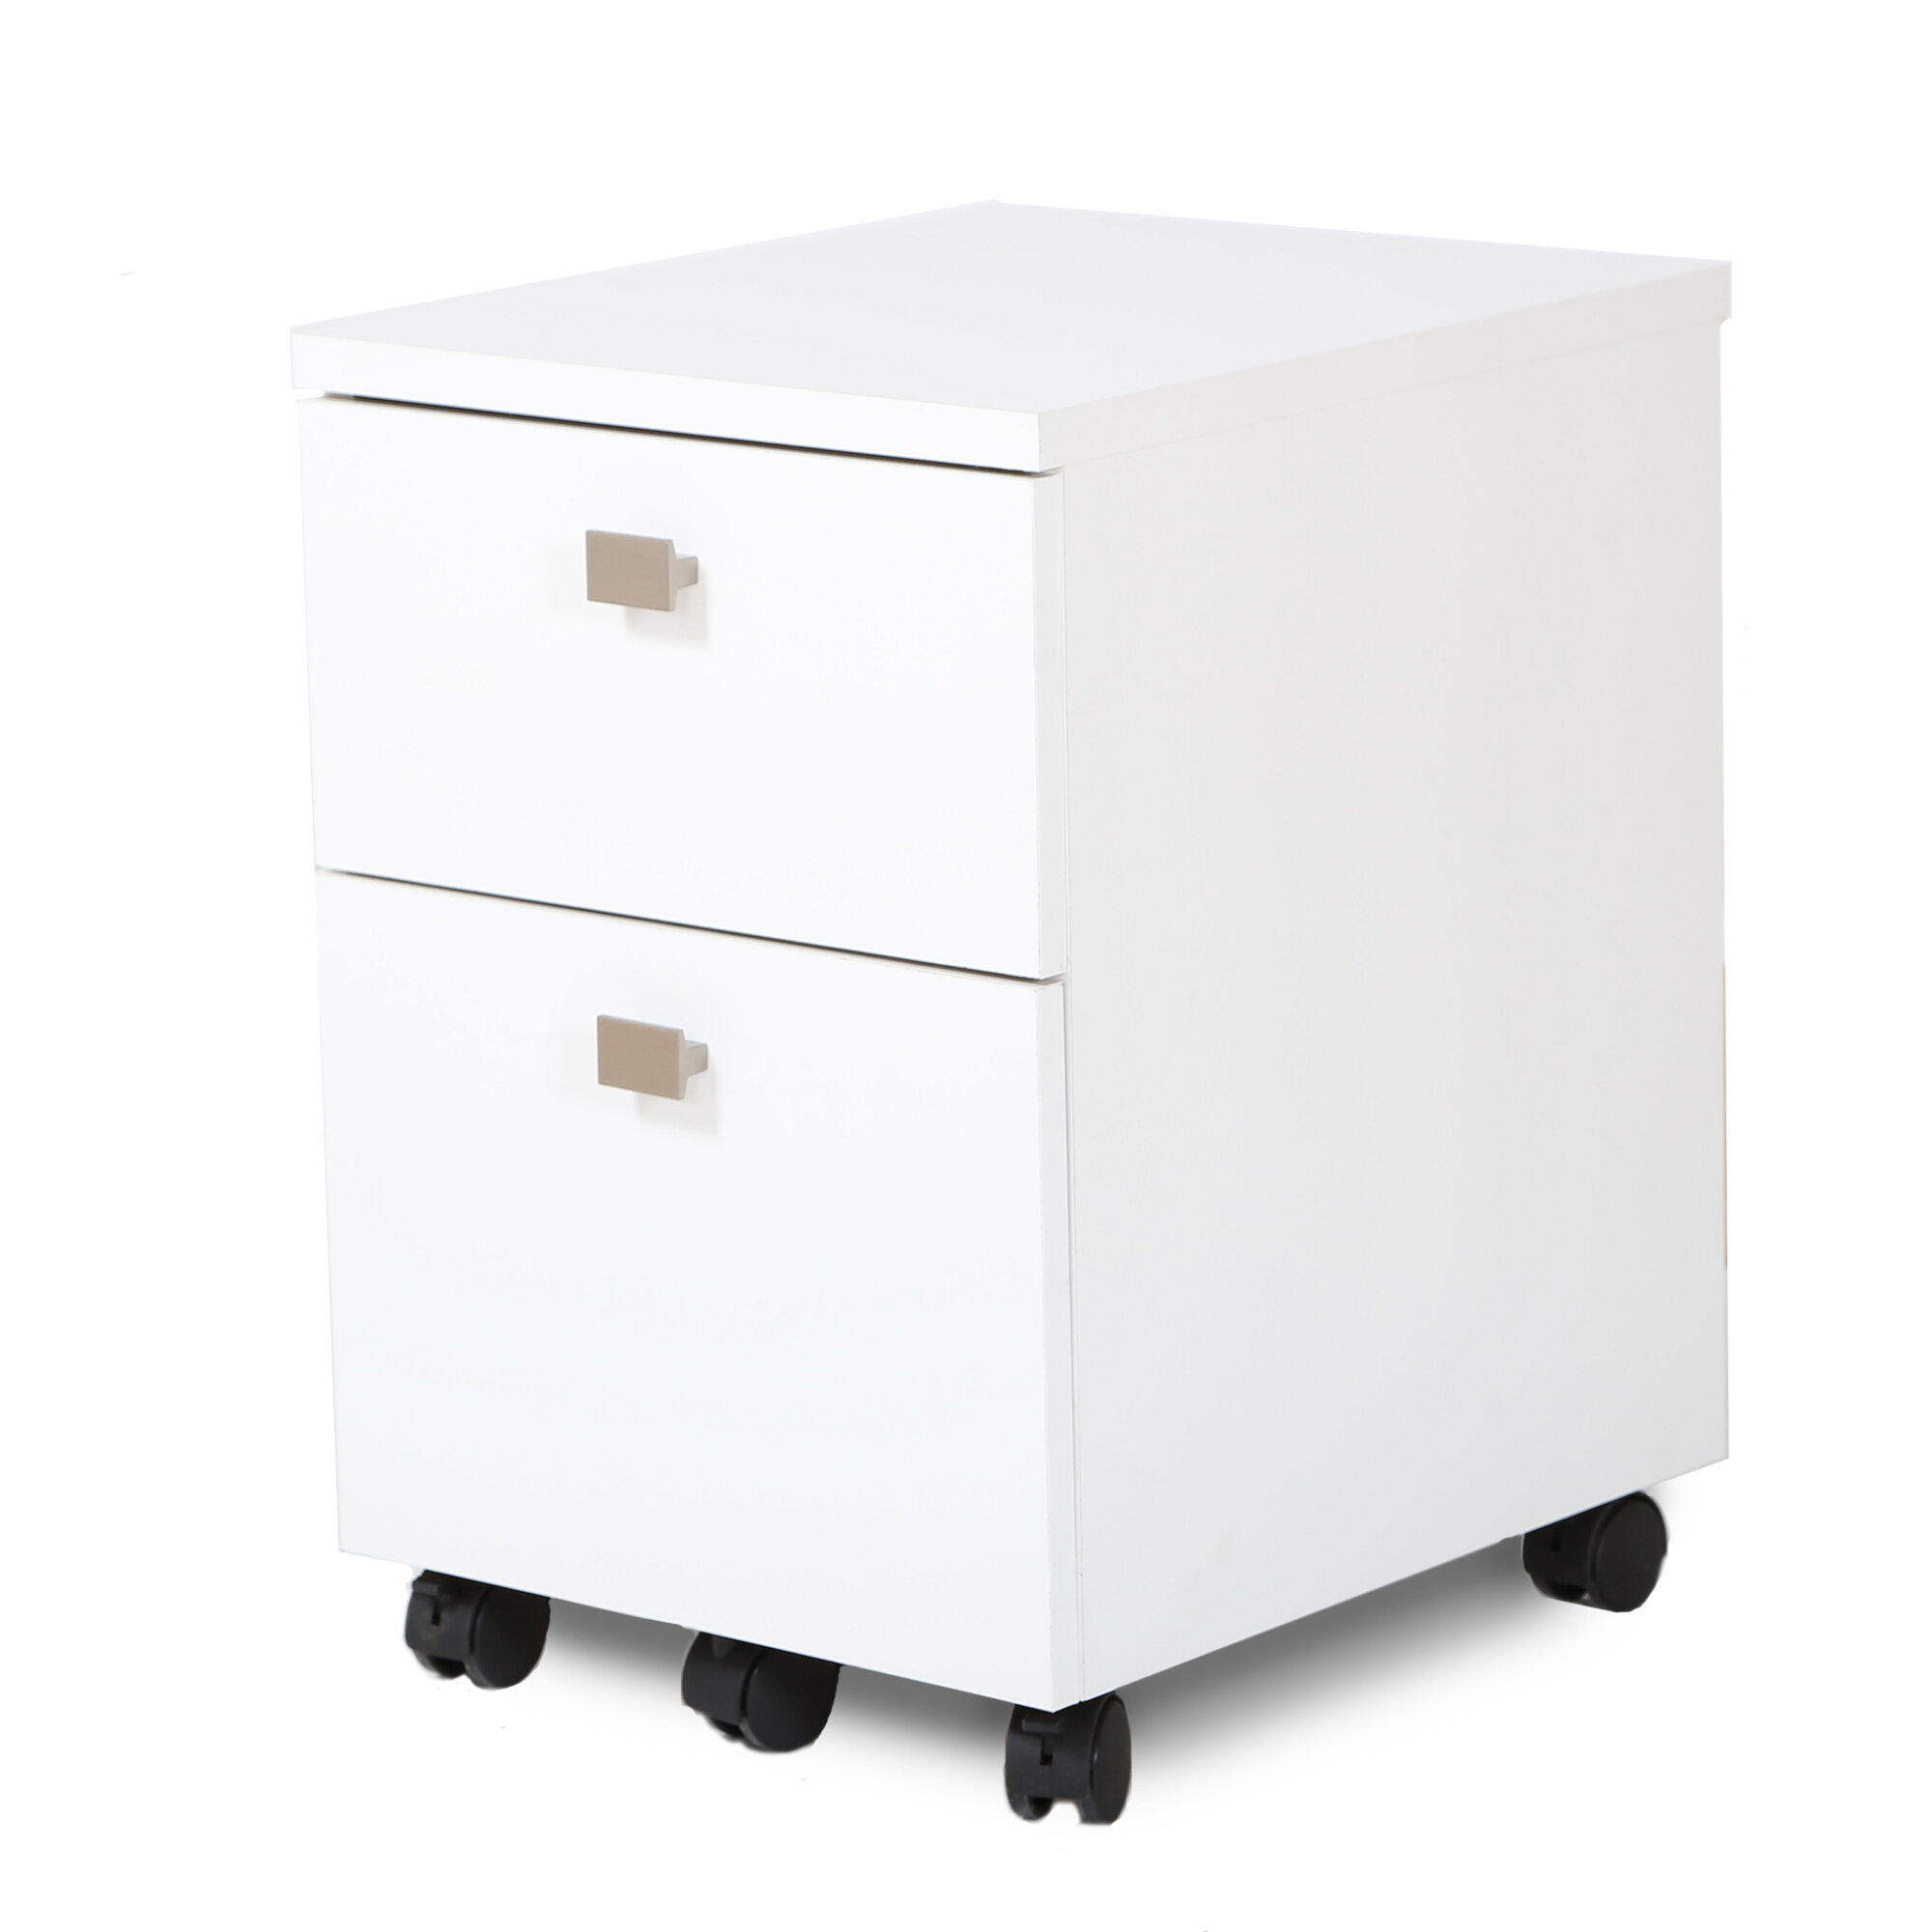 Elegant 2 Drawer File Cabinets Collections